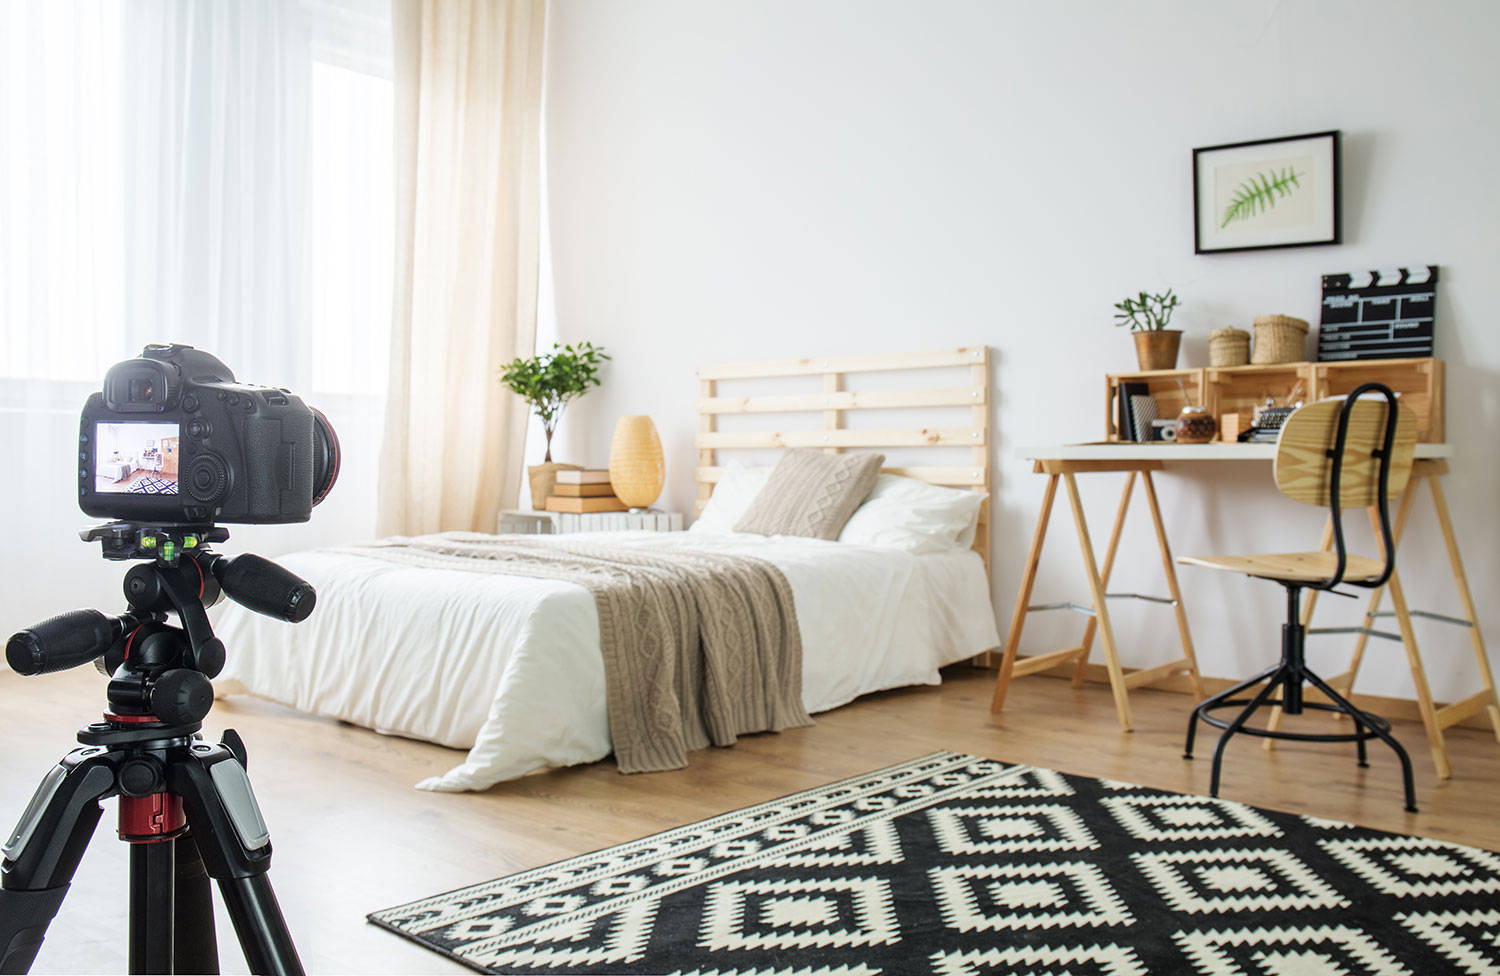 5 Common Real Estate Photography Mistakes And How To Avoid Them